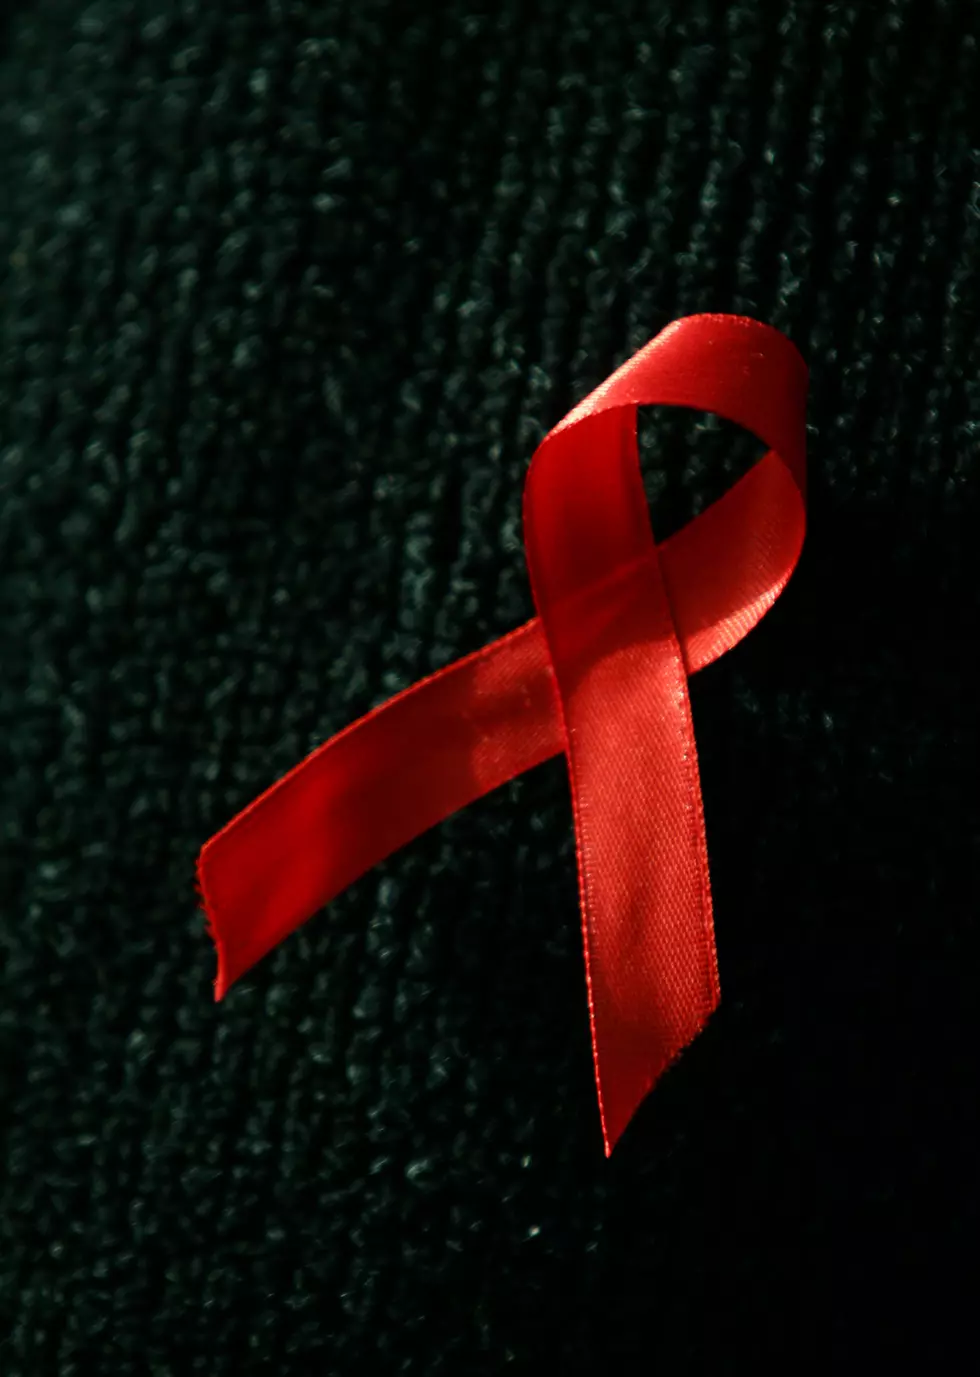 SWLA Aids Council To Commemorate World Aids Day